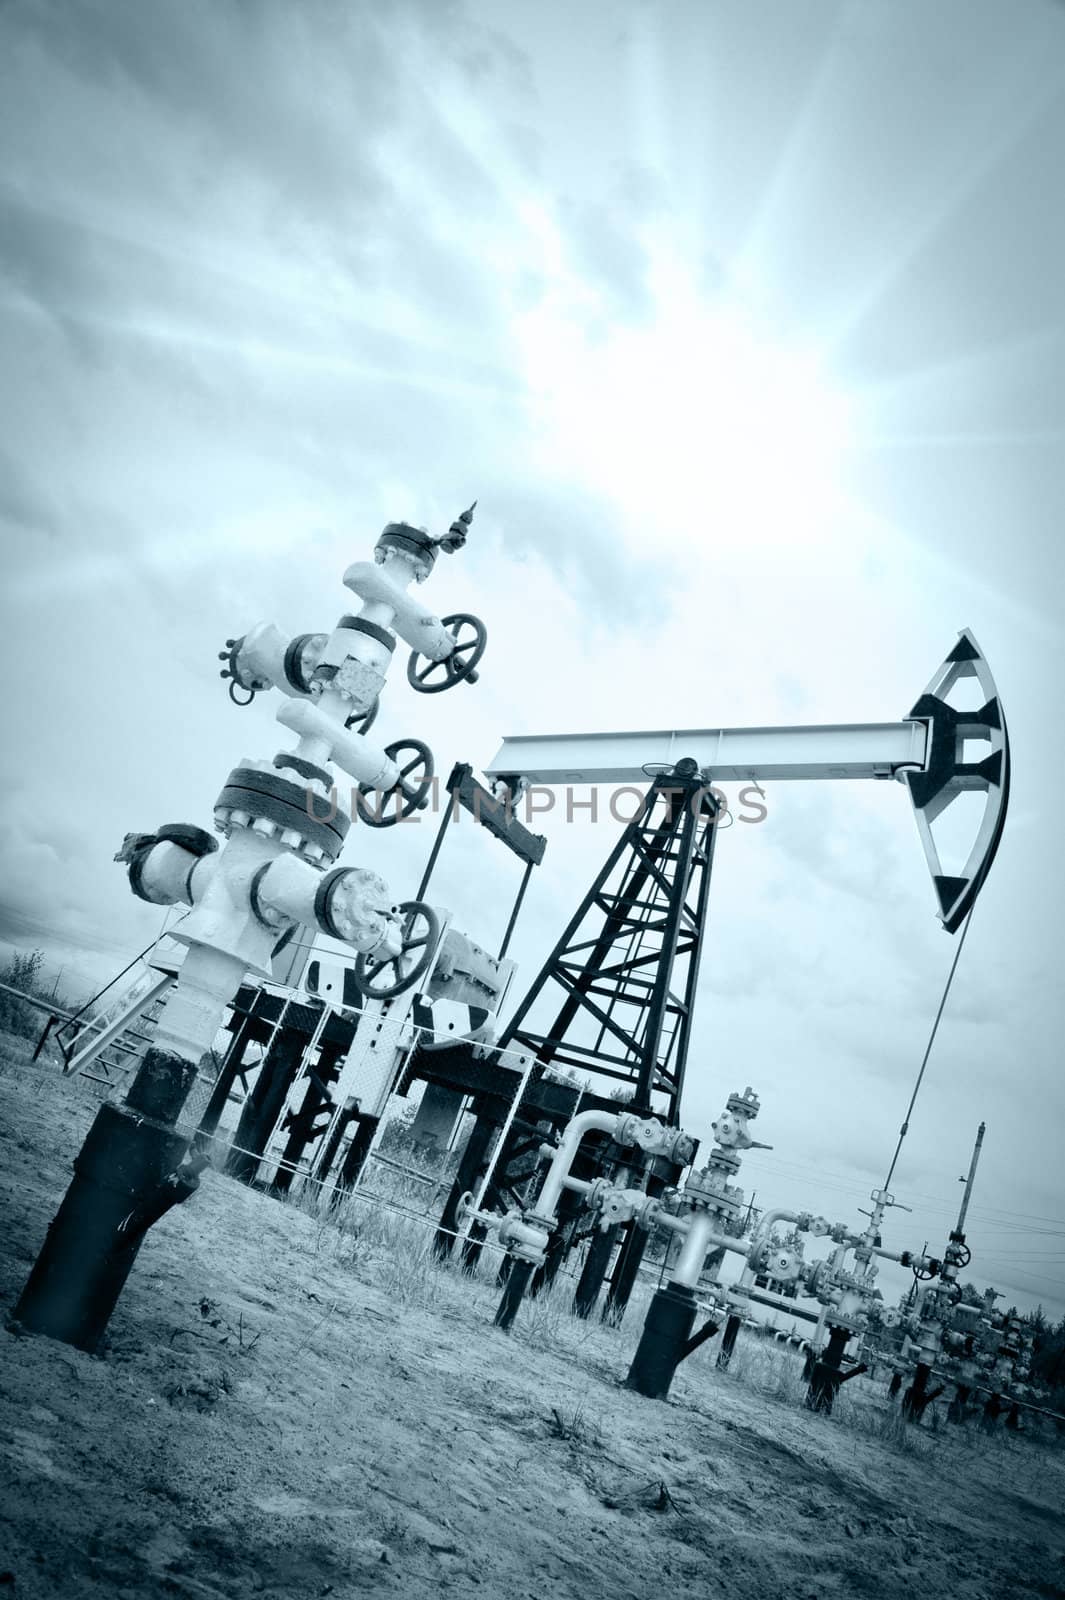 Extraction of oil. Pump jack and oil wellhead. Toned.